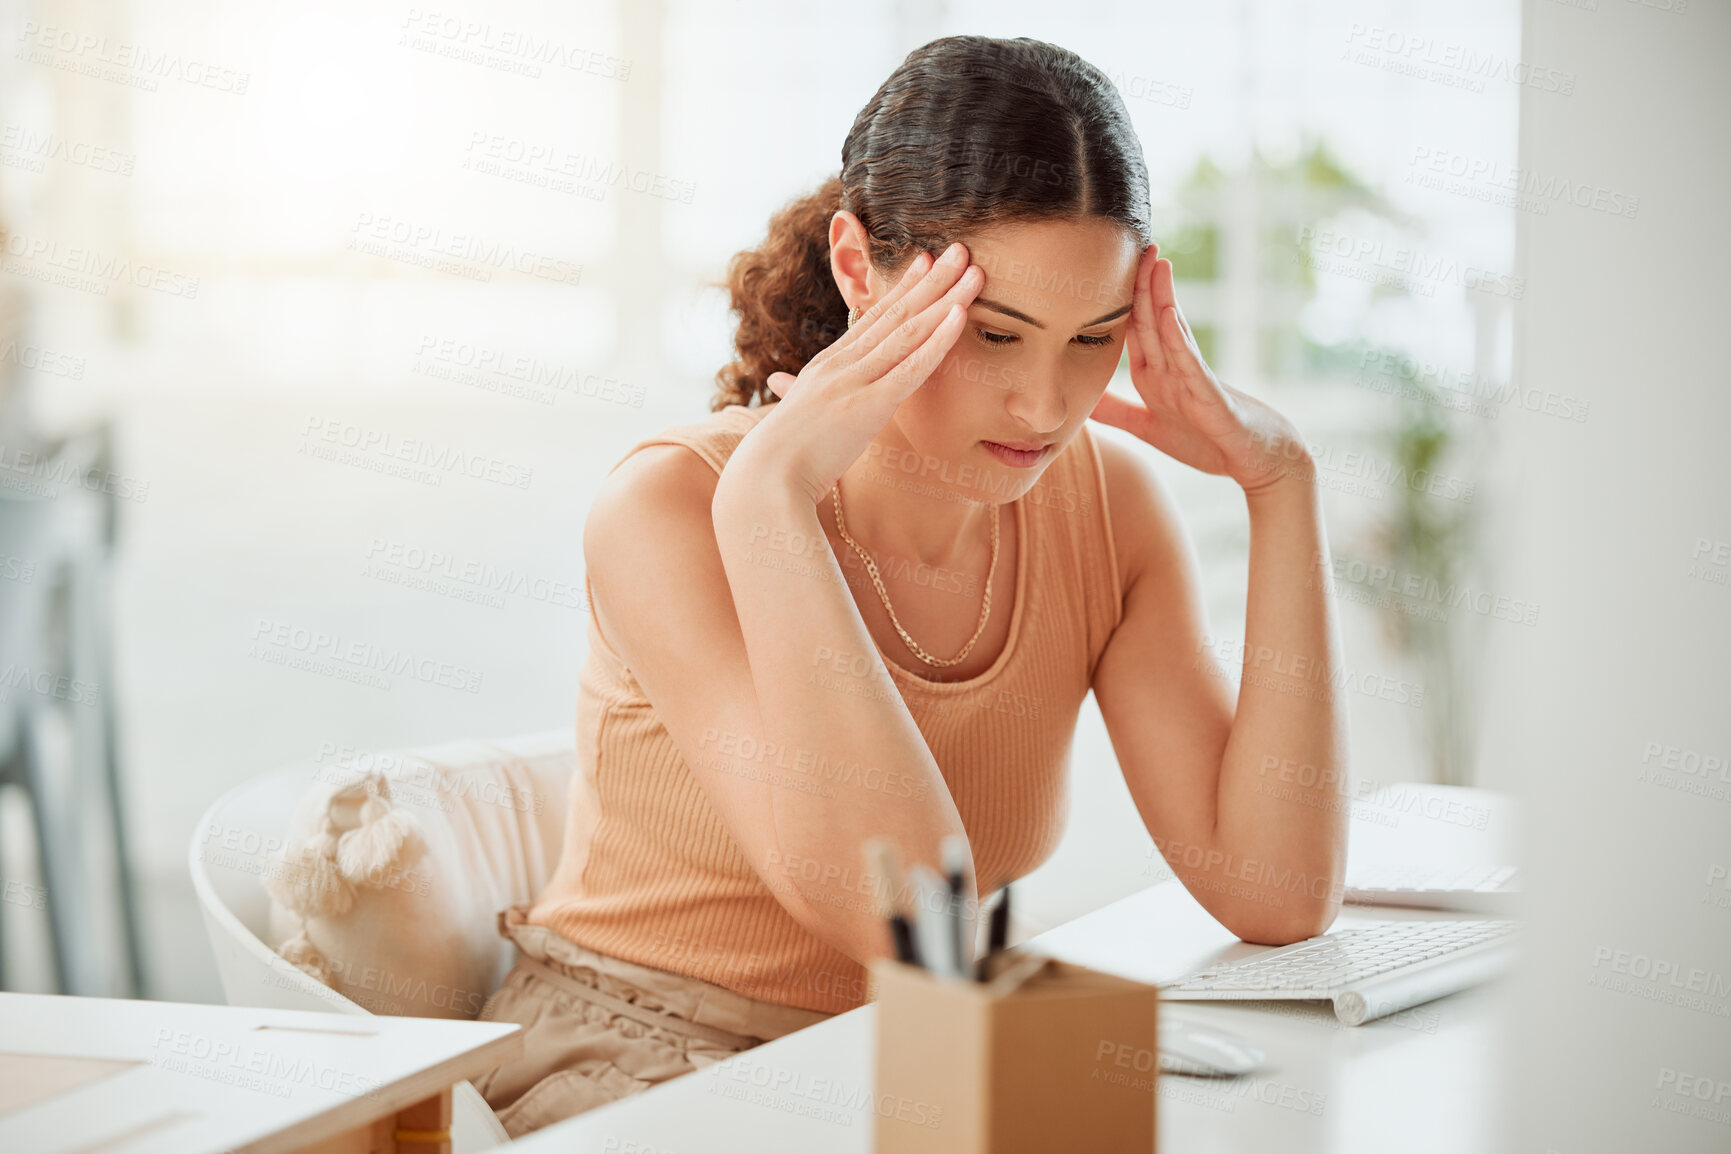 Buy stock photo One anxious young hispanic business woman suffering with a headache while working on a computer in an office. Entrepreneur feeling overworked, tired and anxious about deadlines. Mentally frustrated with burnout and stress